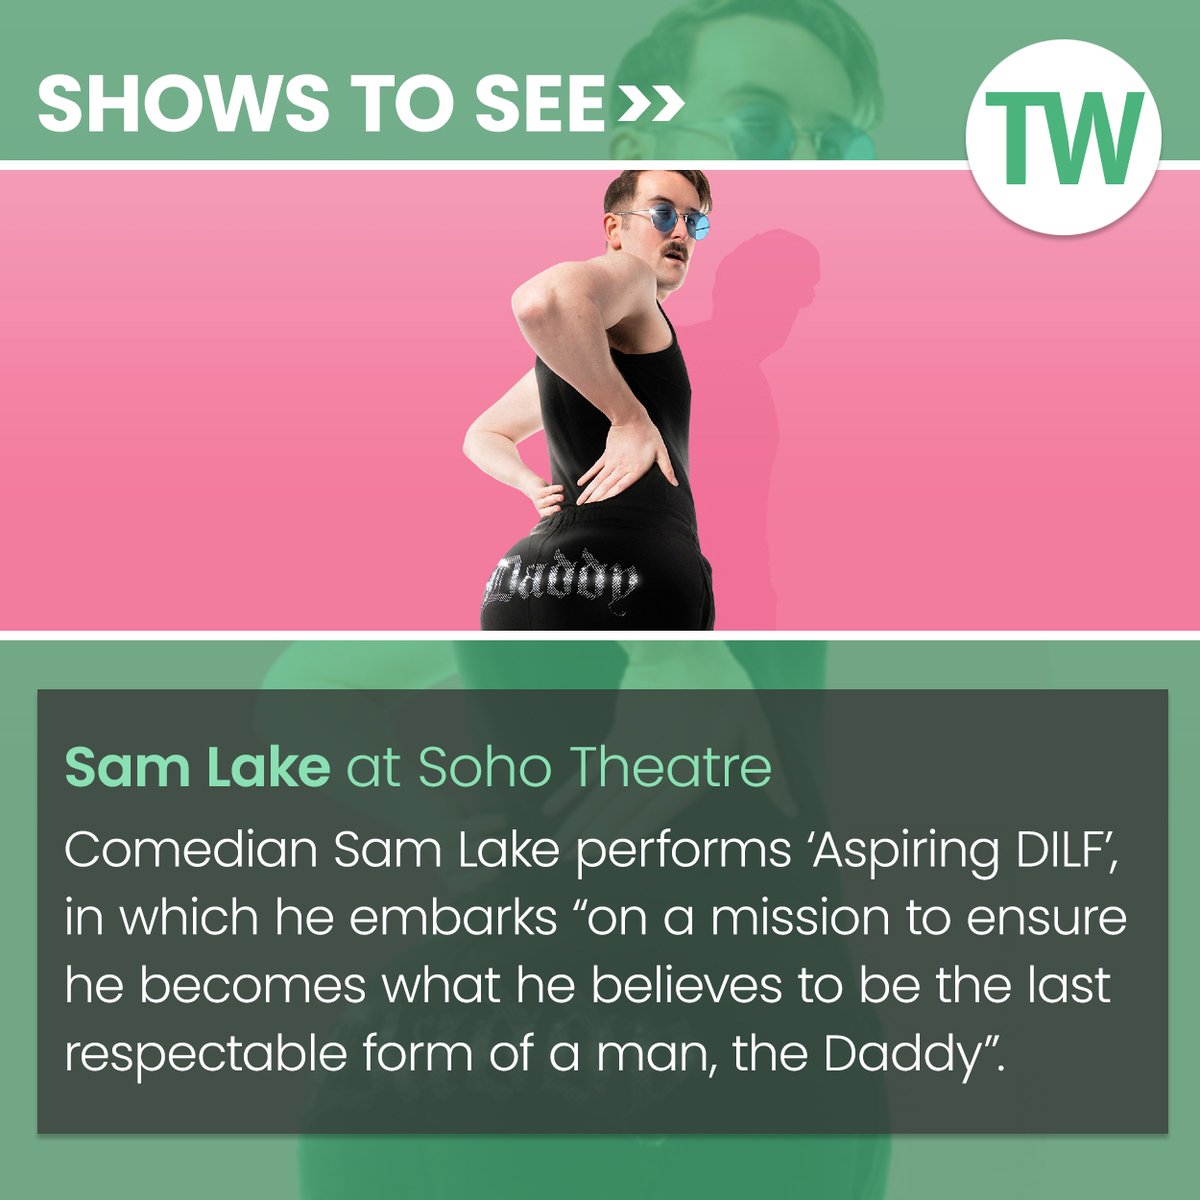 Among our recommended shows to see this week: Sam Lake’s ‘Aspiring DILF’ at Soho Theatre. Get more show tips here: bit.ly/3TORapH @sohotheatre @mrsamlake